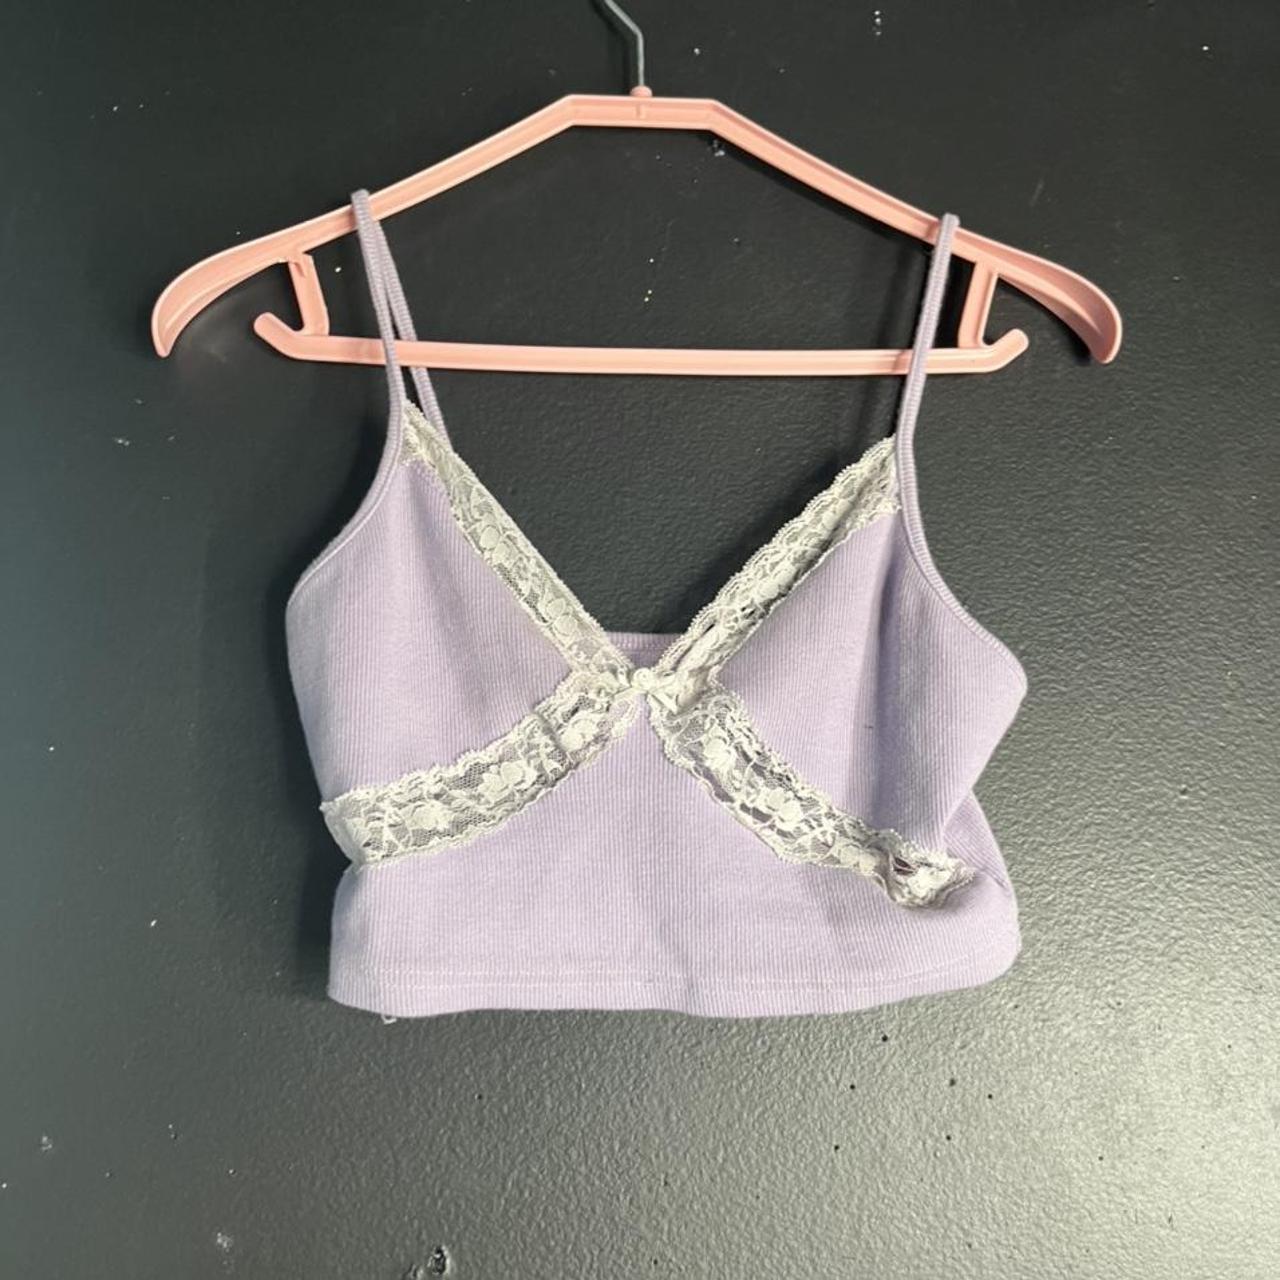 Product Image 1 - beautiful purple tank !
from the